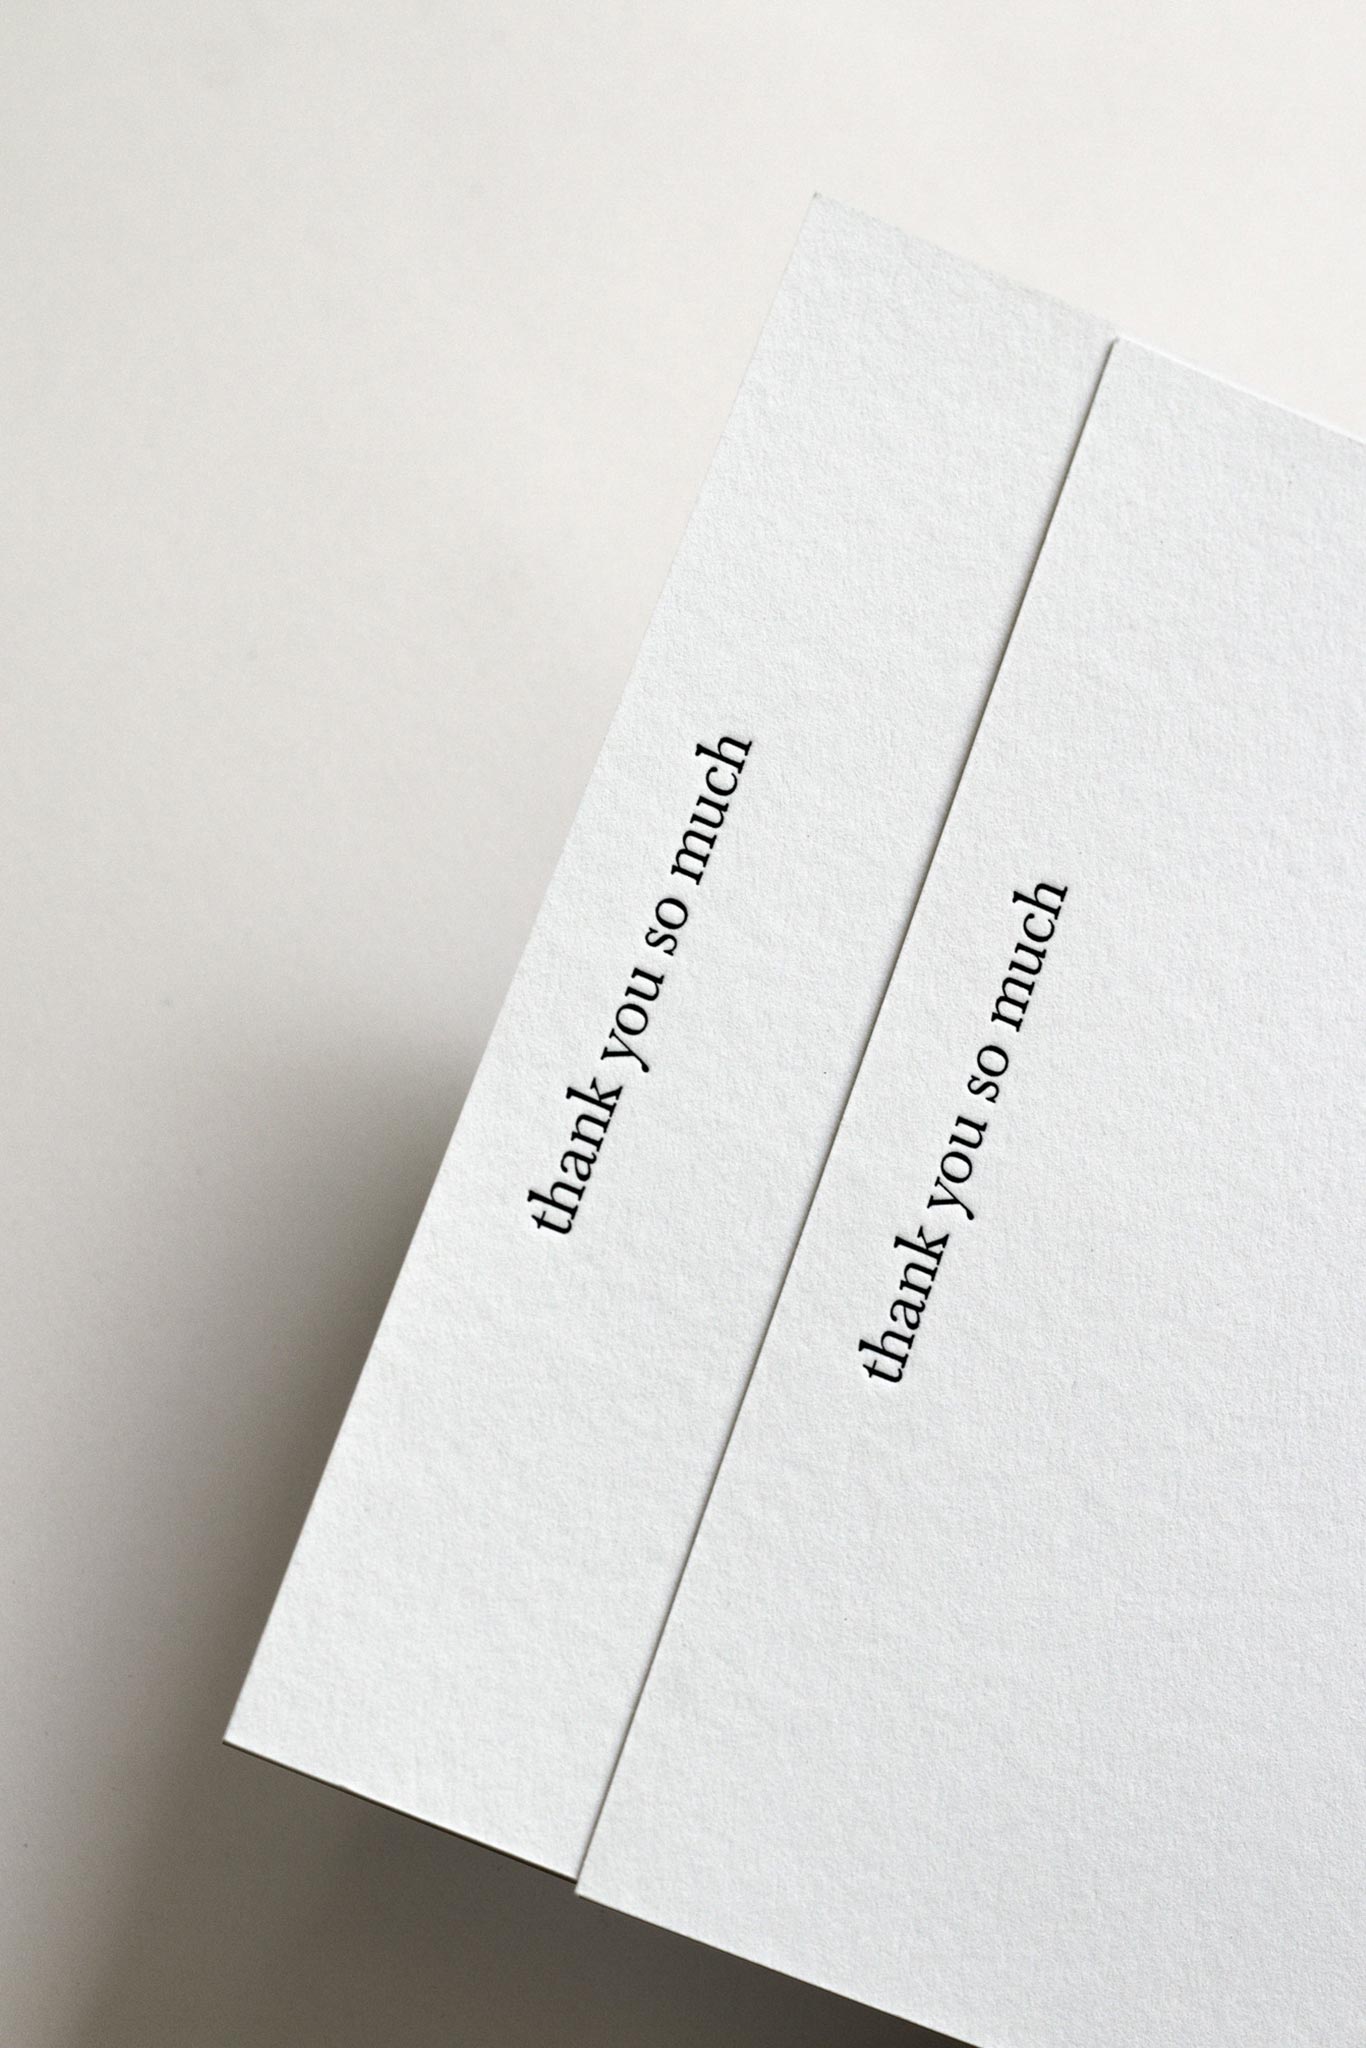 Notecards - Thank You So Much, Letterpress